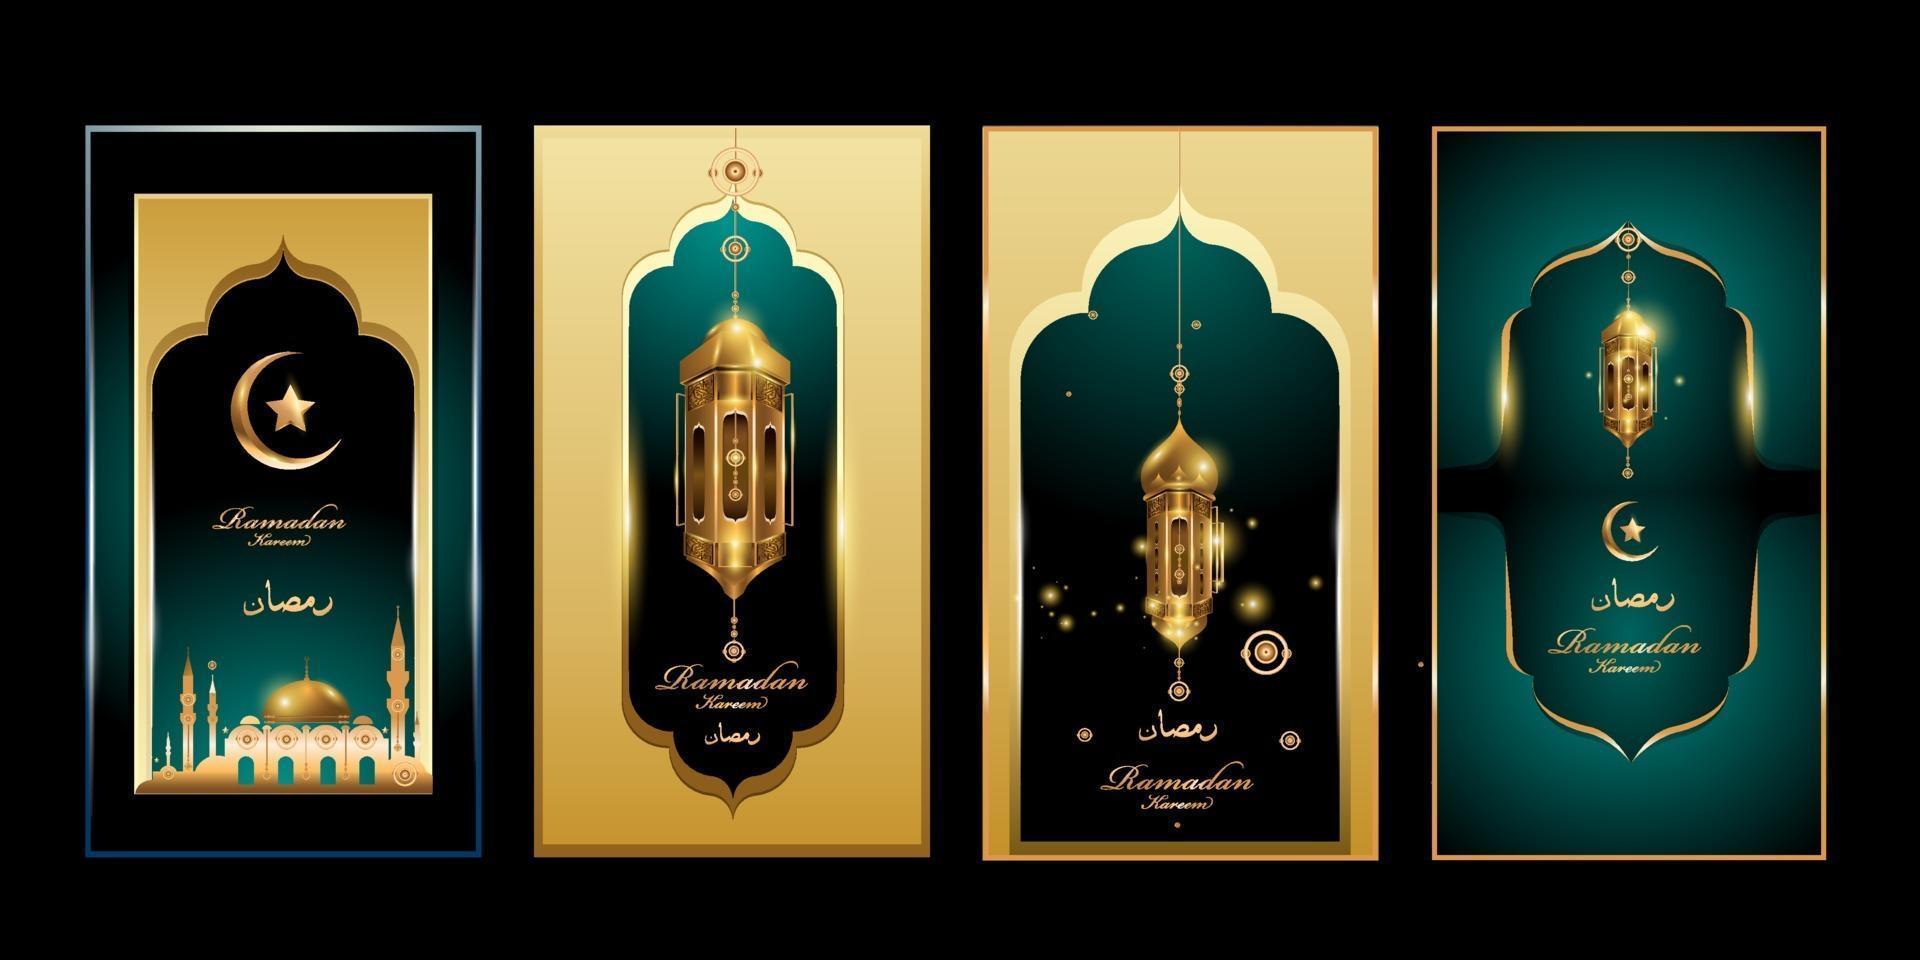 Ramadan Kareem in green and gold color with lantern and mosque illustration for banner, greeting, and social media vector